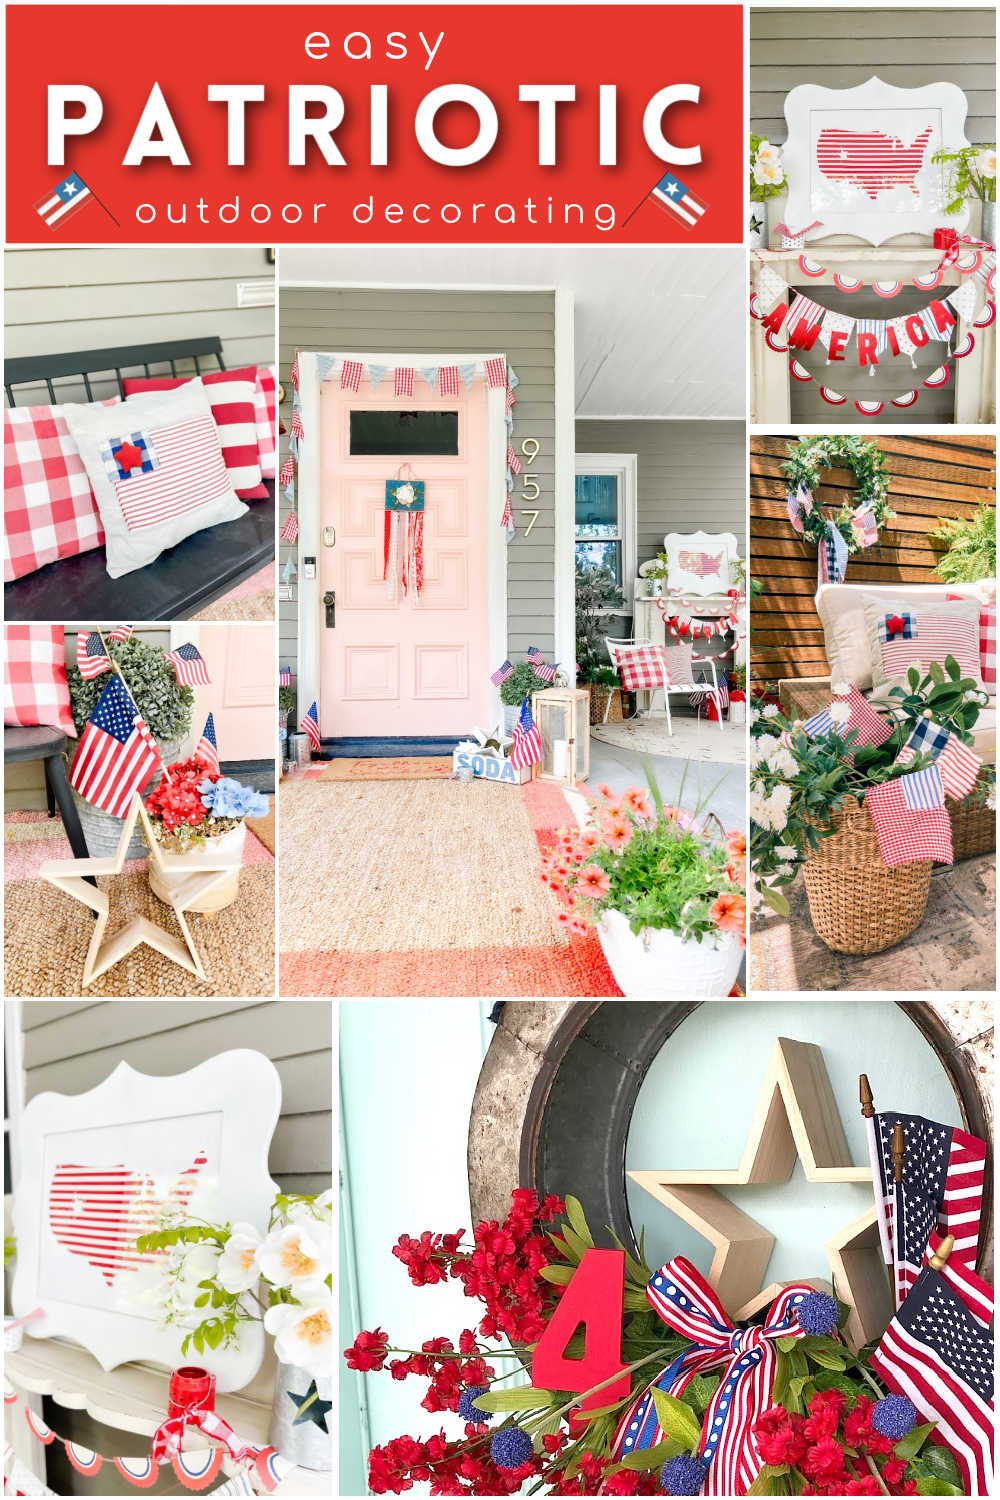 Easy Patriotic Outdoor Decorating. Give your home extra curb appeal with these easy DIY patriotic porch and patio ideas! 